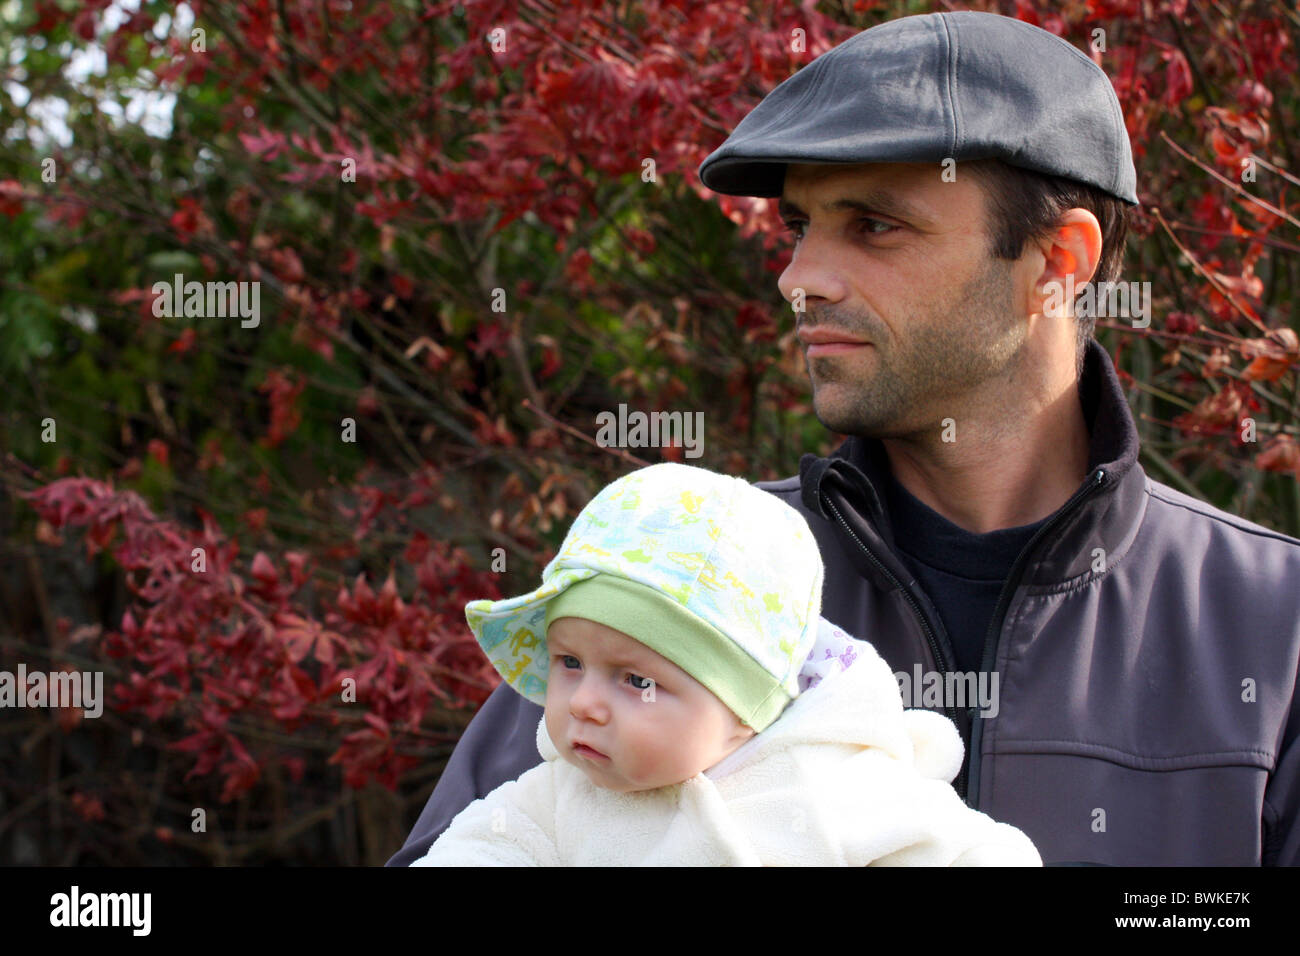 Father with his baby son looking at something. Stock Photo